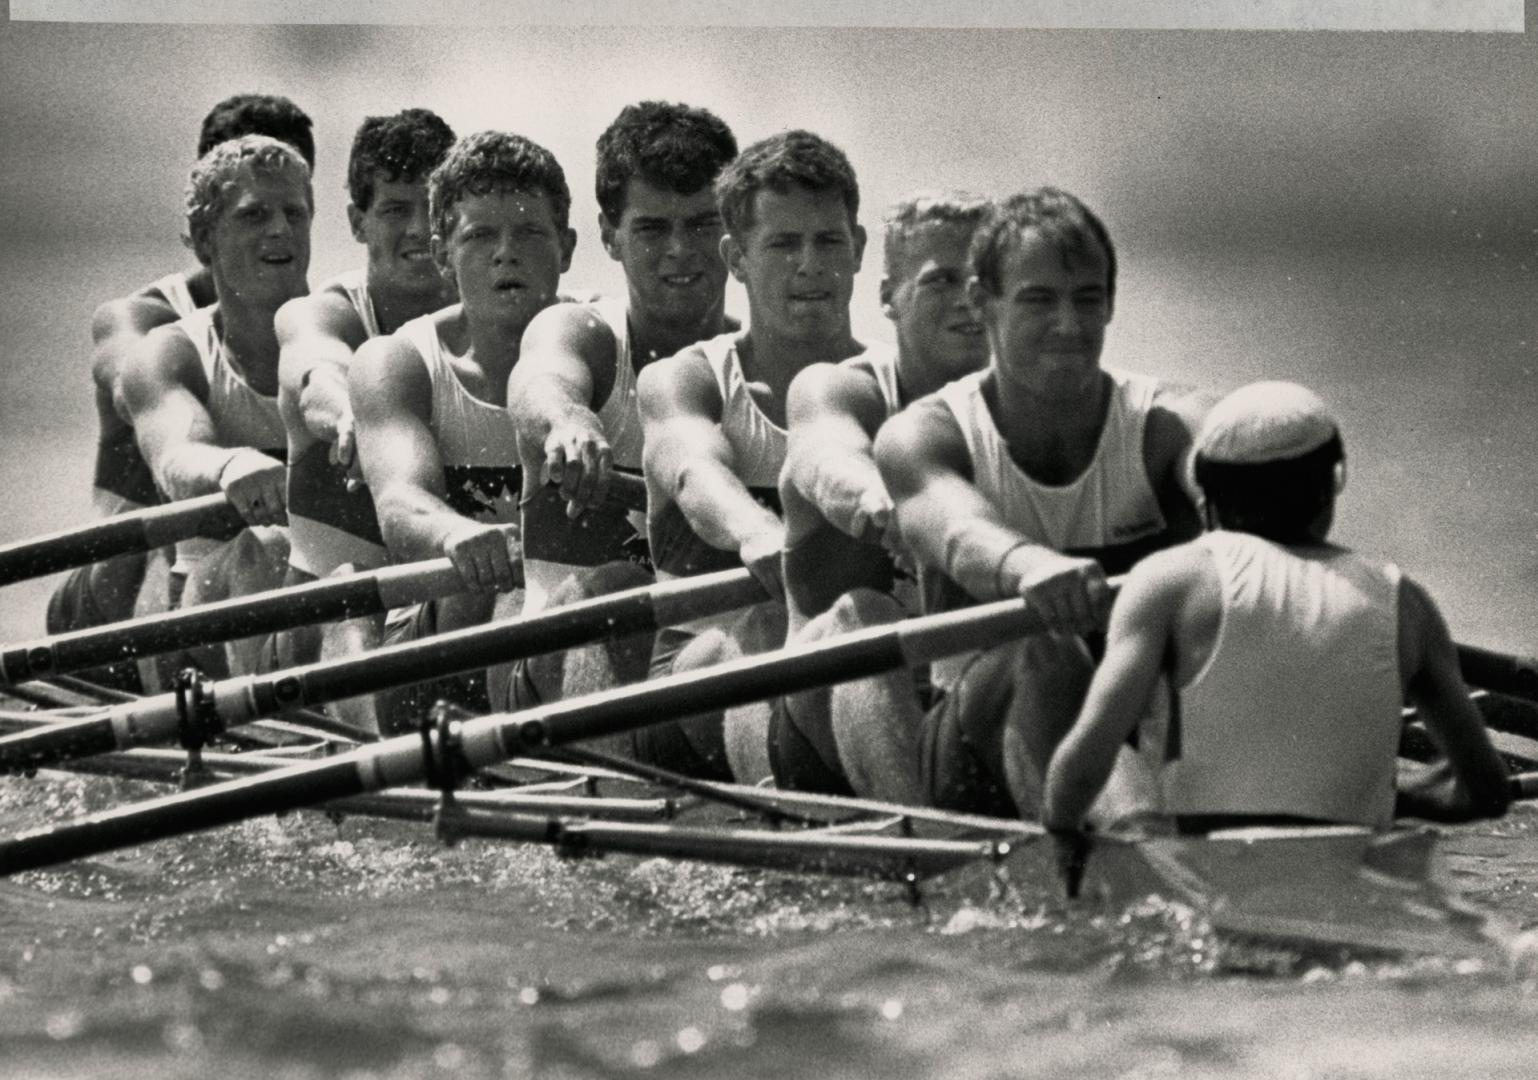 Canada's heavy eights pull together on their way to a bronze medal